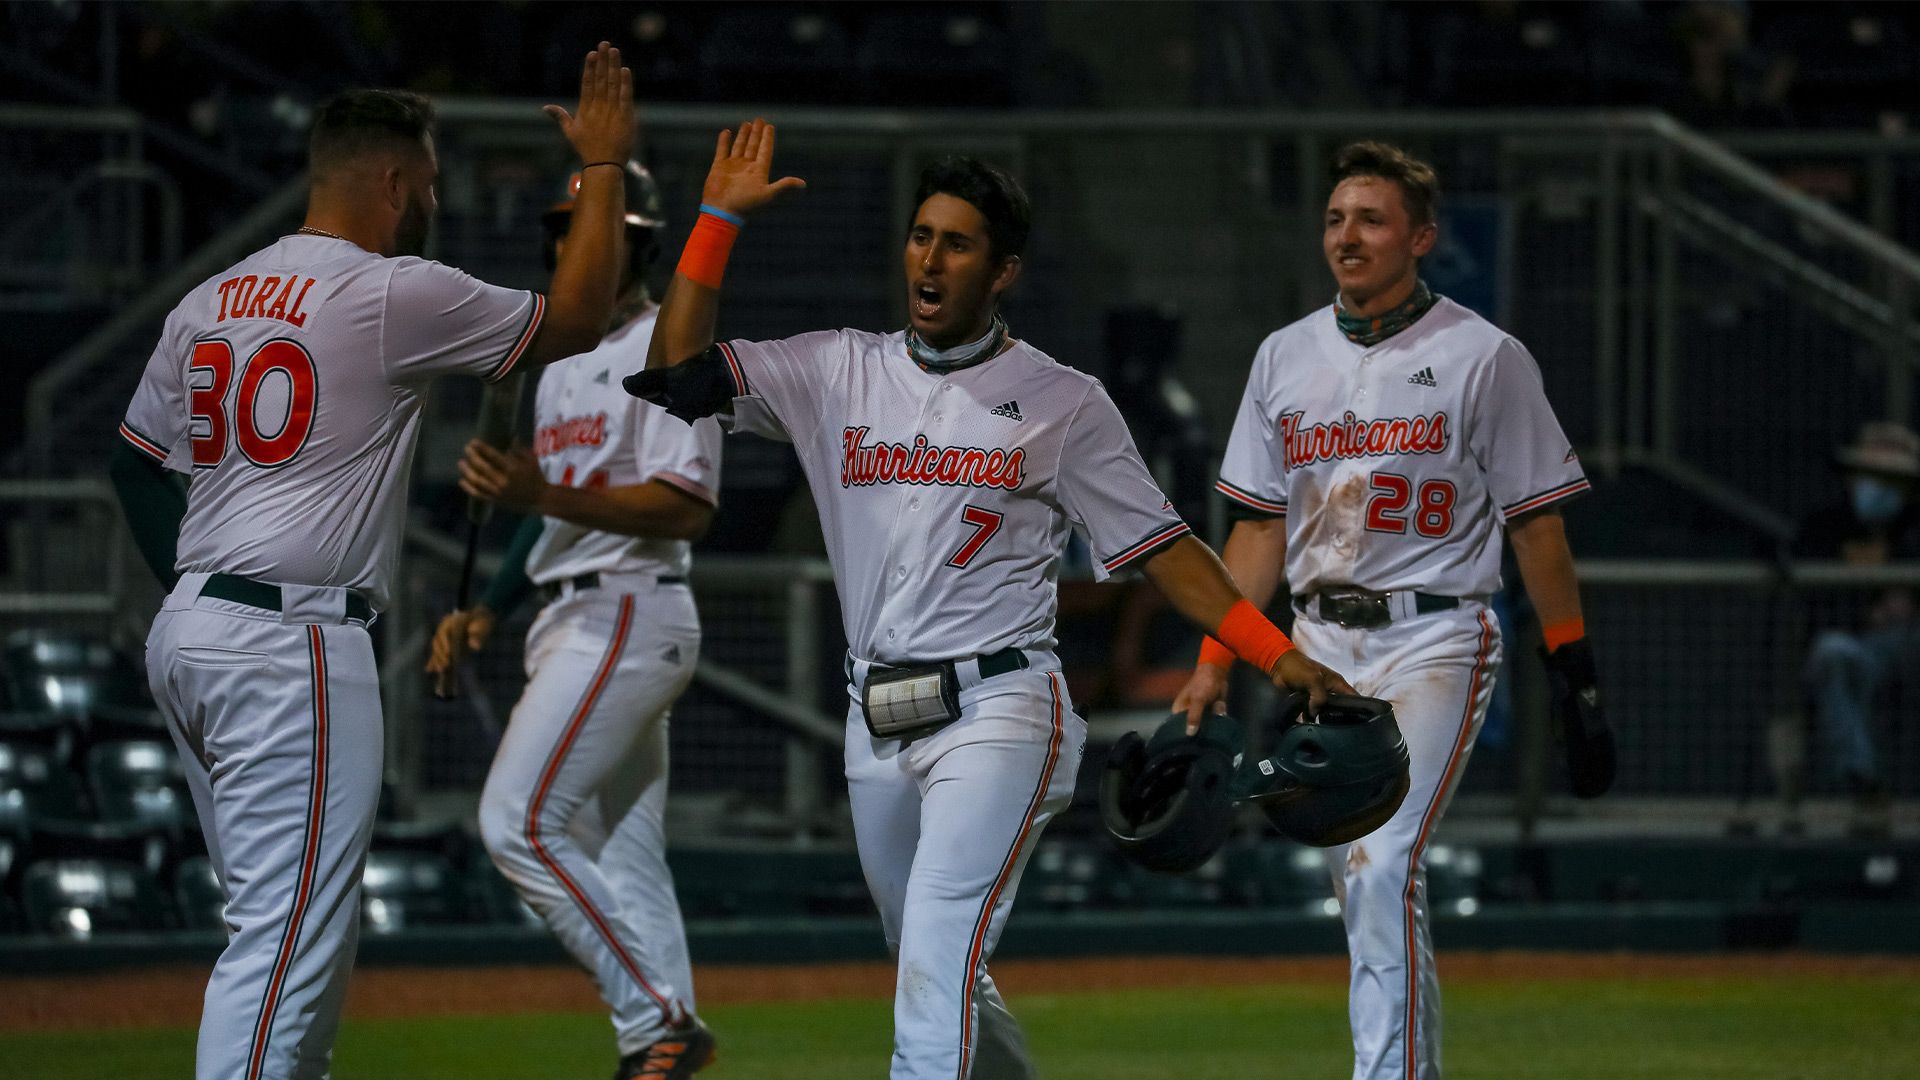 Canes Rally Back to Sweep Wake Forest